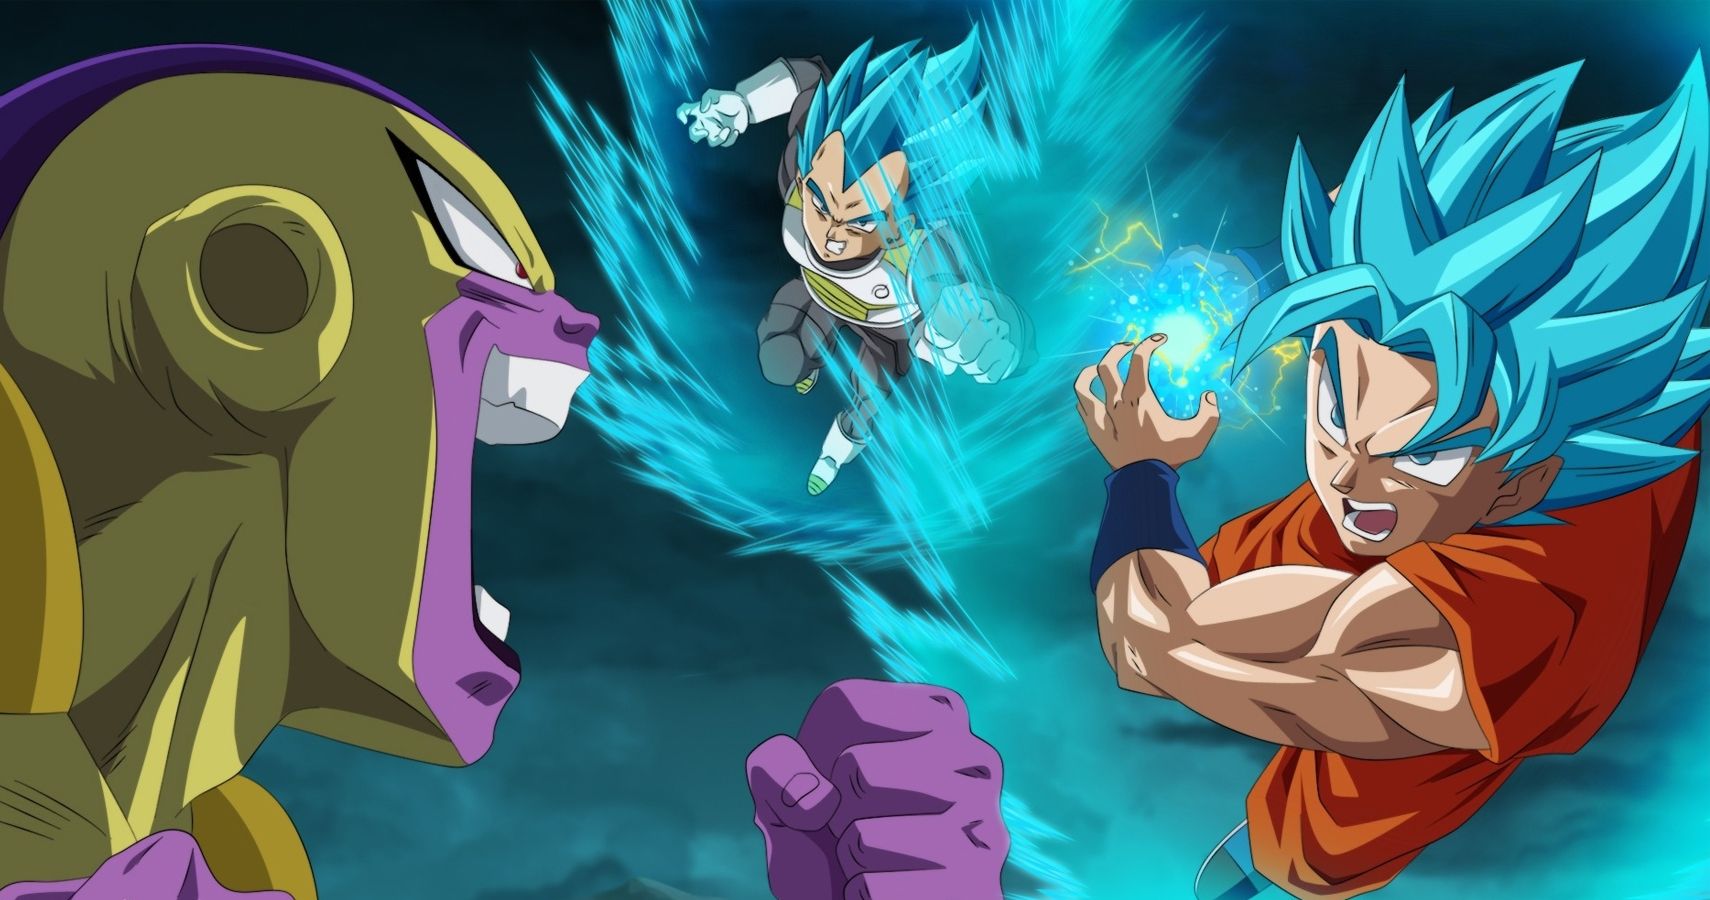 Every Dragon Ball Z Saga Ranked From Worst To Best